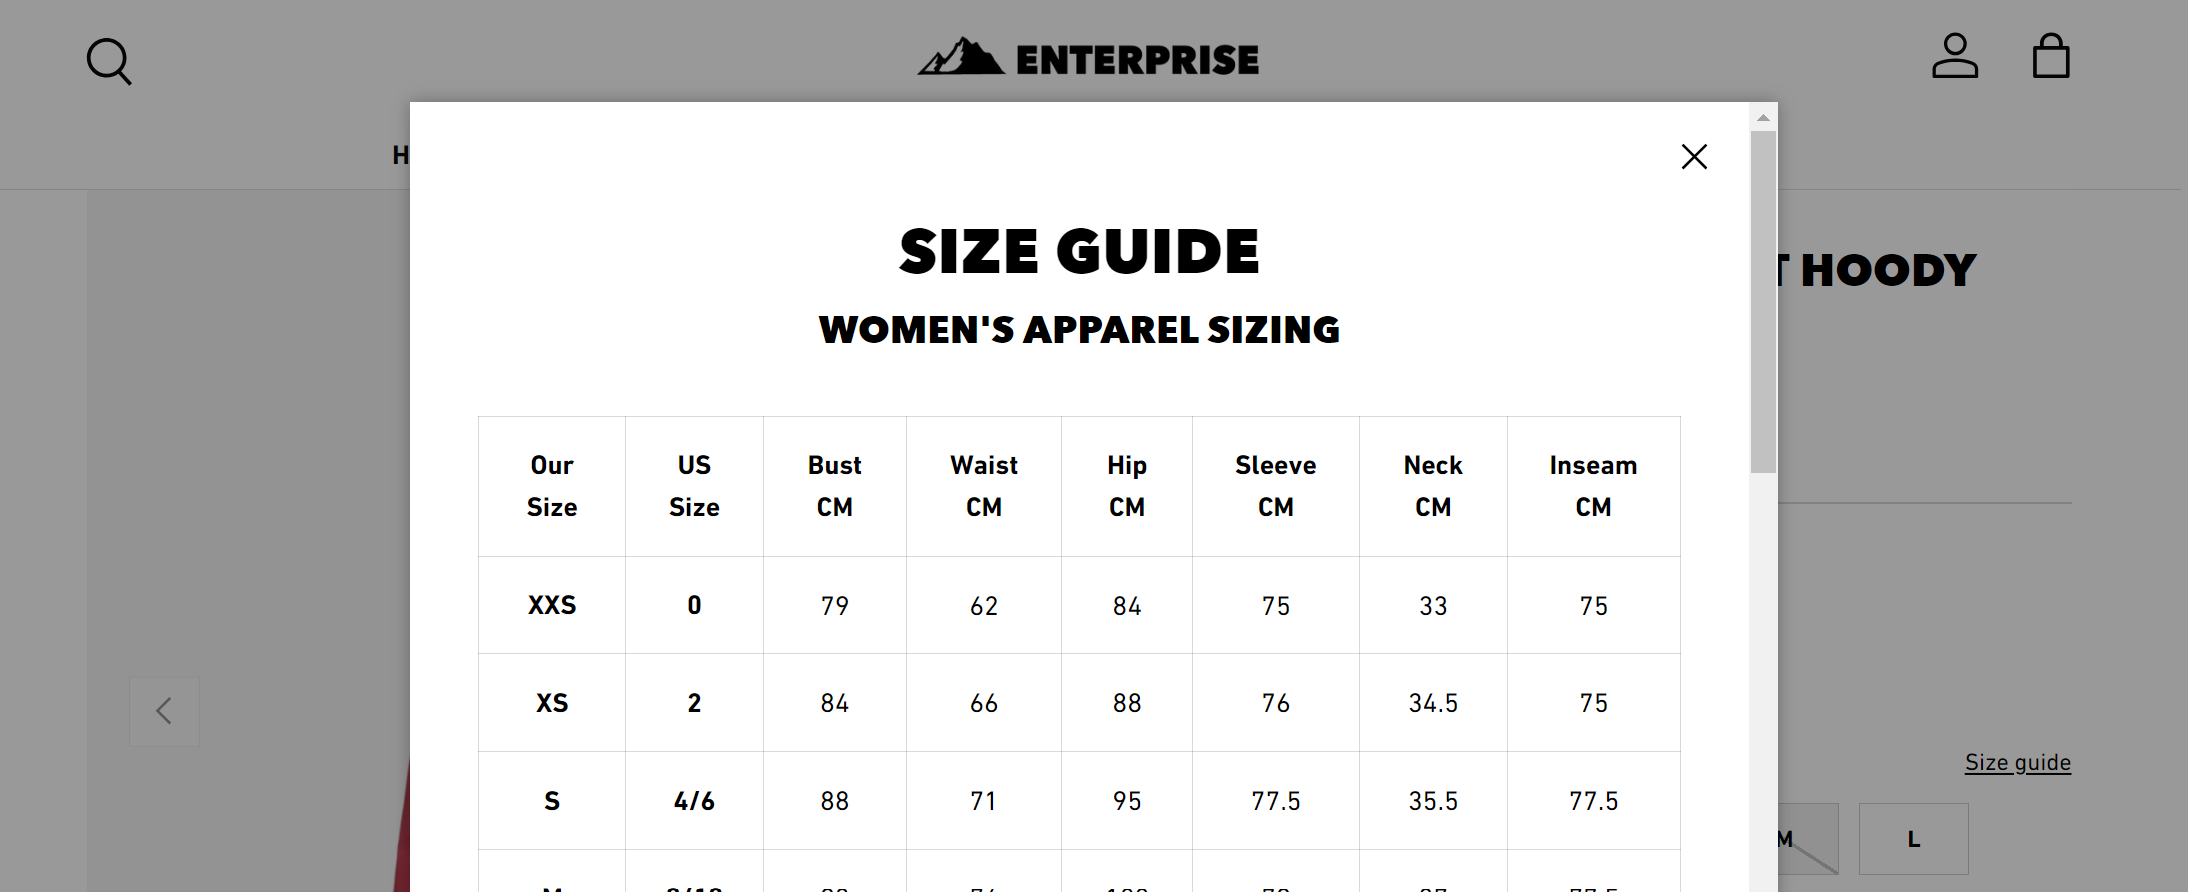 Size-guide2.png